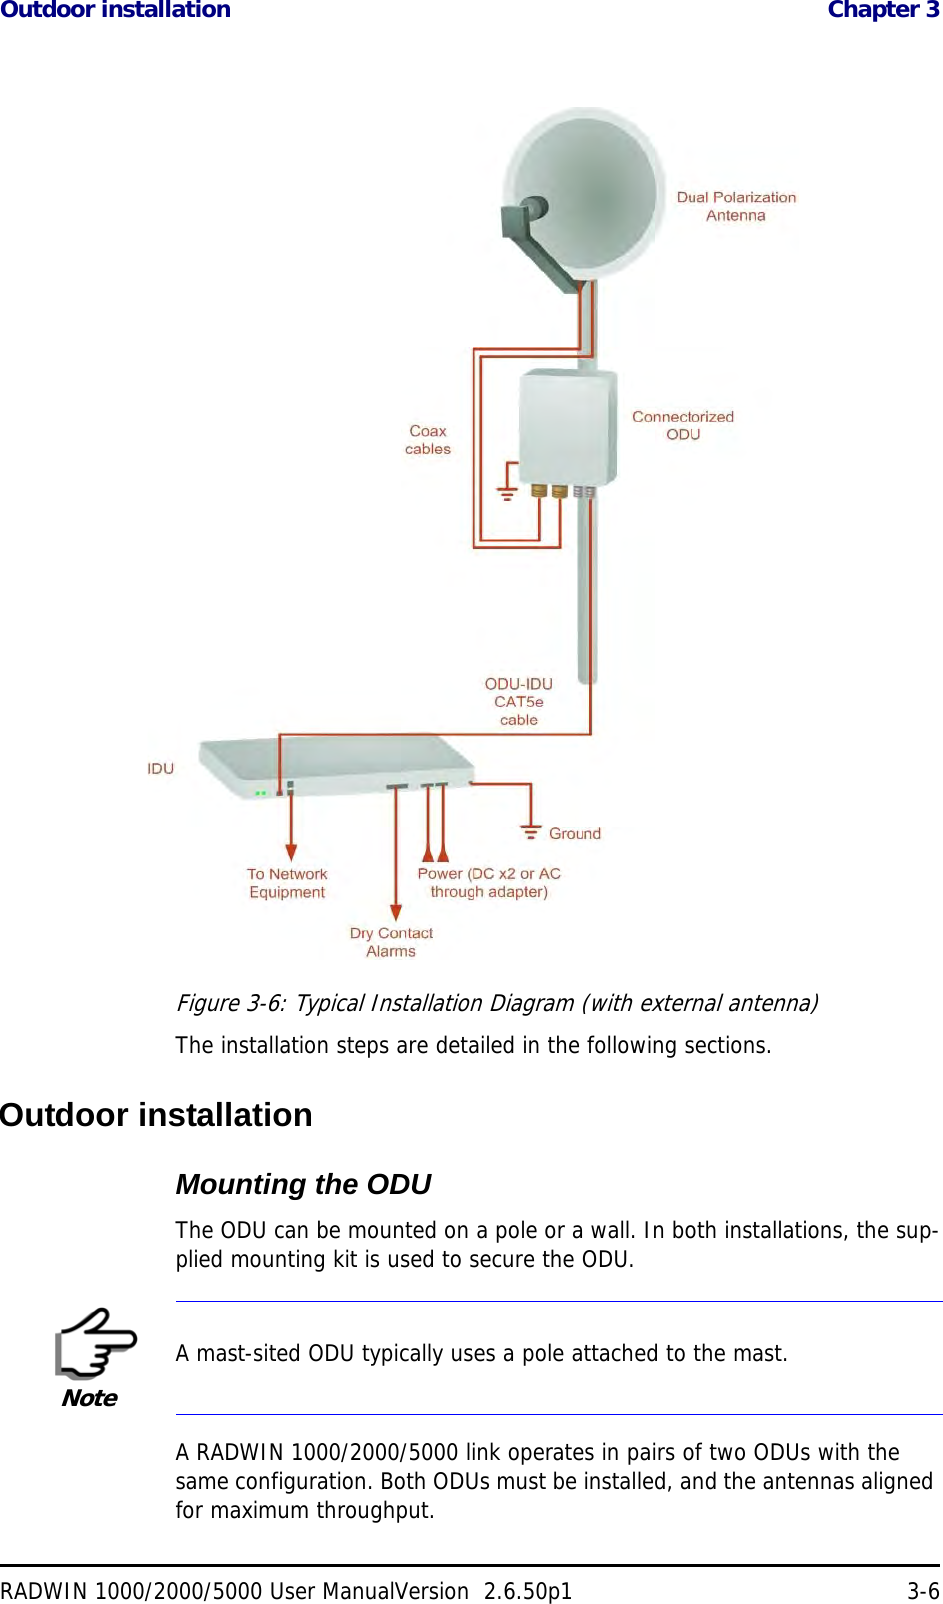 Outdoor installation  Chapter 3RADWIN 1000/2000/5000 User ManualVersion  2.6.50p1 3-6Figure 3-6: Typical Installation Diagram (with external antenna)The installation steps are detailed in the following sections.Outdoor installationMounting the ODUThe ODU can be mounted on a pole or a wall. In both installations, the sup-plied mounting kit is used to secure the ODU.A RADWIN 1000/2000/5000 link operates in pairs of two ODUs with the same configuration. Both ODUs must be installed, and the antennas aligned for maximum throughput.NoteA mast-sited ODU typically uses a pole attached to the mast.